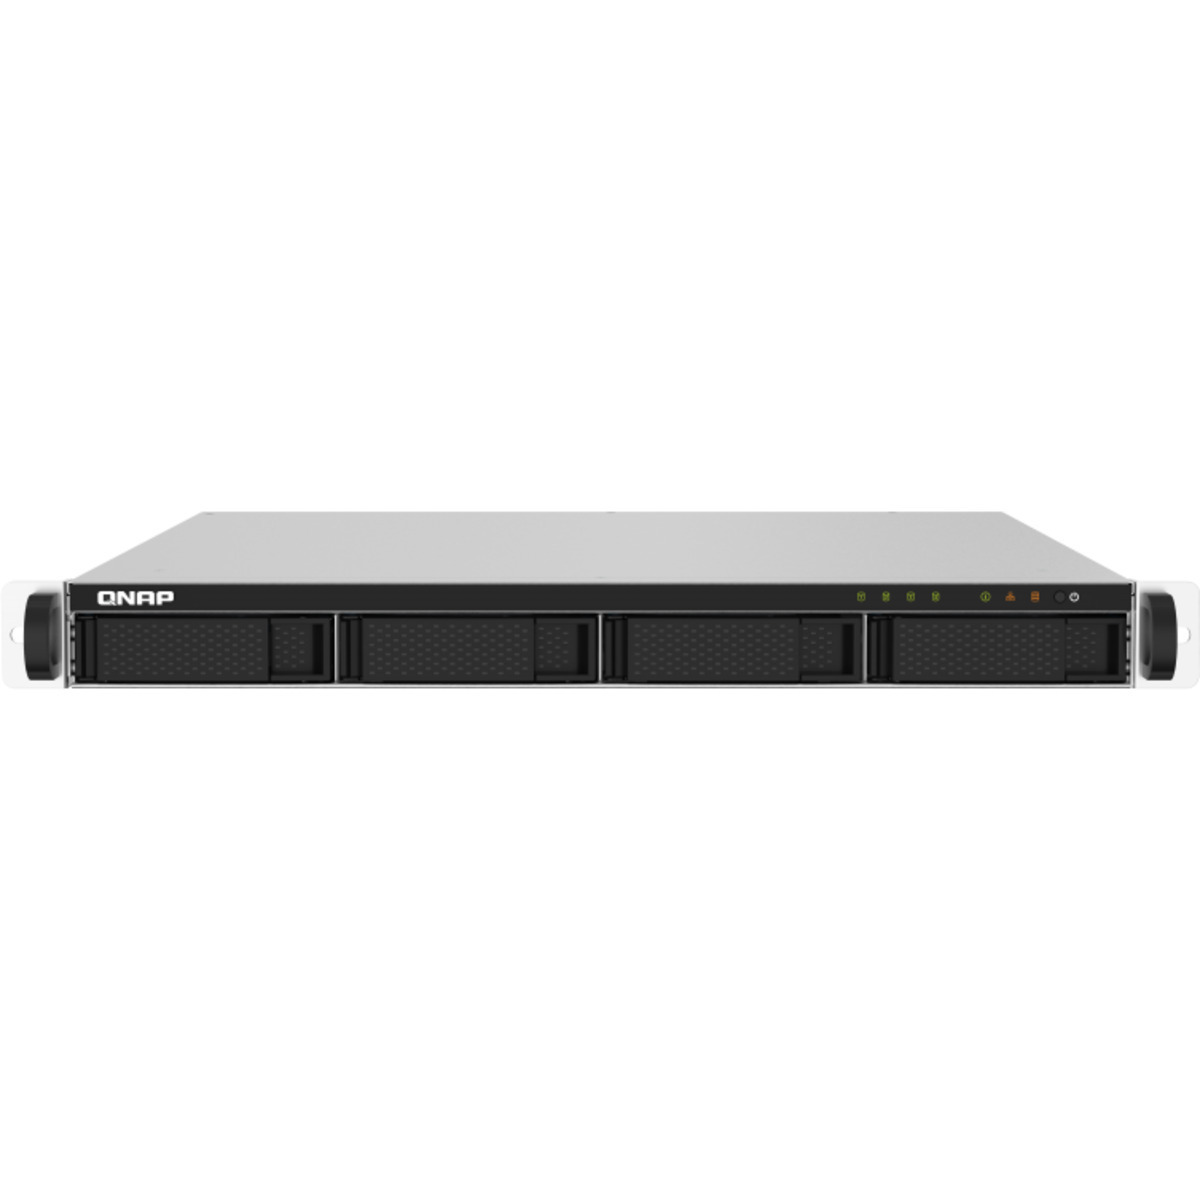 QNAP TS-432PXU 44tb 4-Bay RackMount Personal / Basic Home / Small Office NAS - Network Attached Storage Device 2x22tb Western Digital Ultrastar HC580 SED WUH722422ALE6L1 3.5 7200rpm SATA 6Gb/s HDD ENTERPRISE Class Drives Installed - Burn-In Tested - FREE RAM UPGRADE TS-432PXU